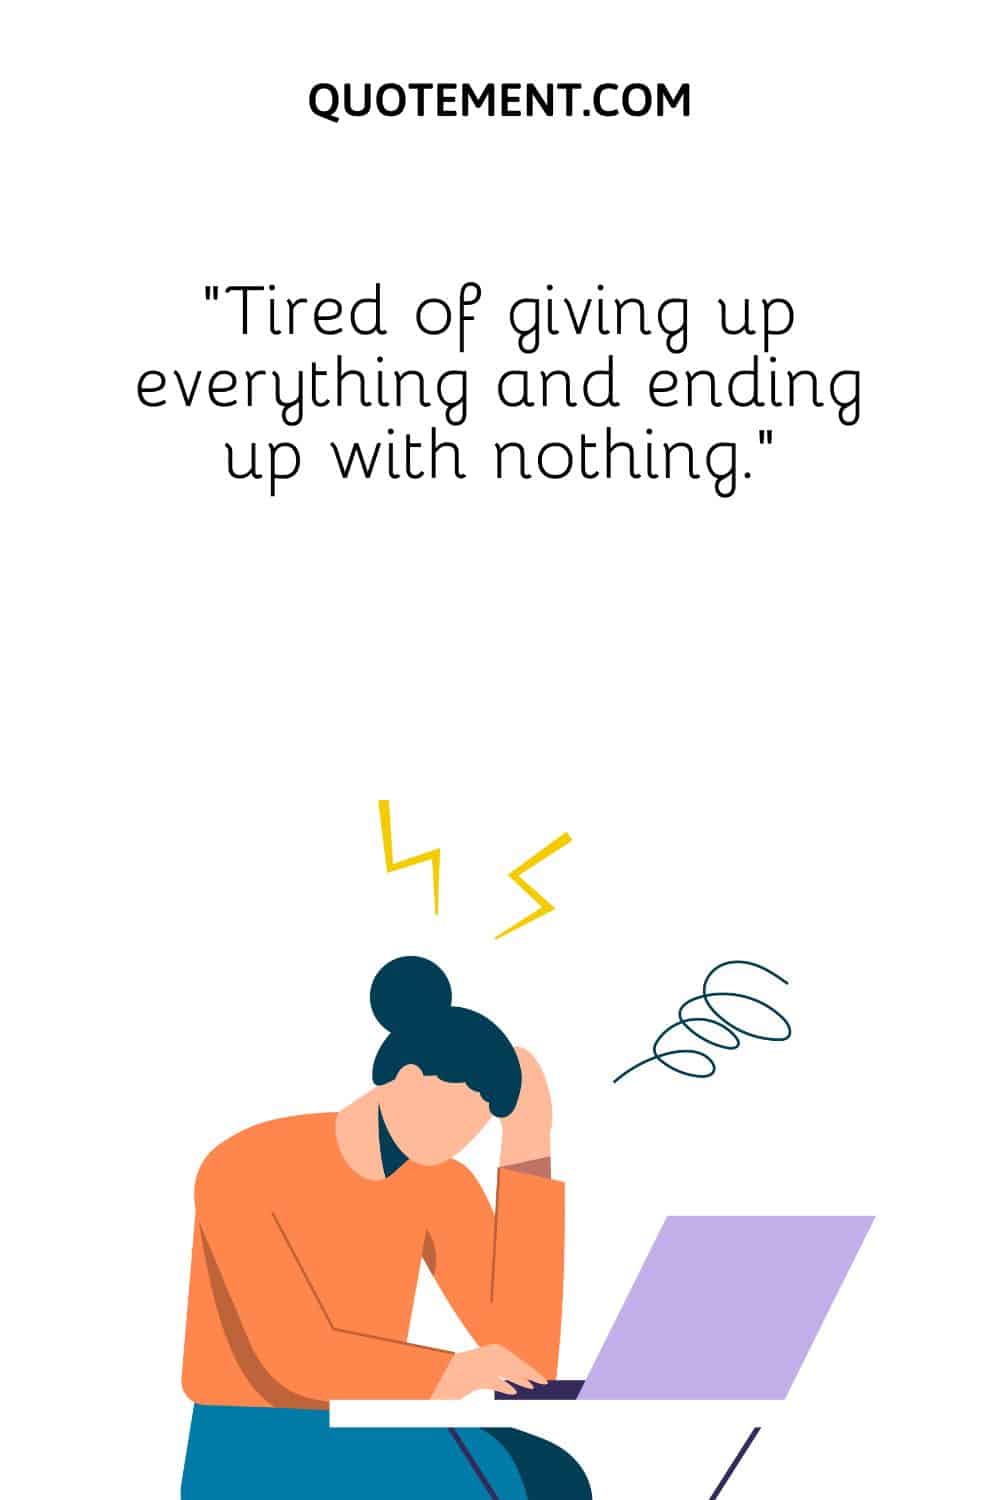 “Tired of giving up everything and ending up with nothing